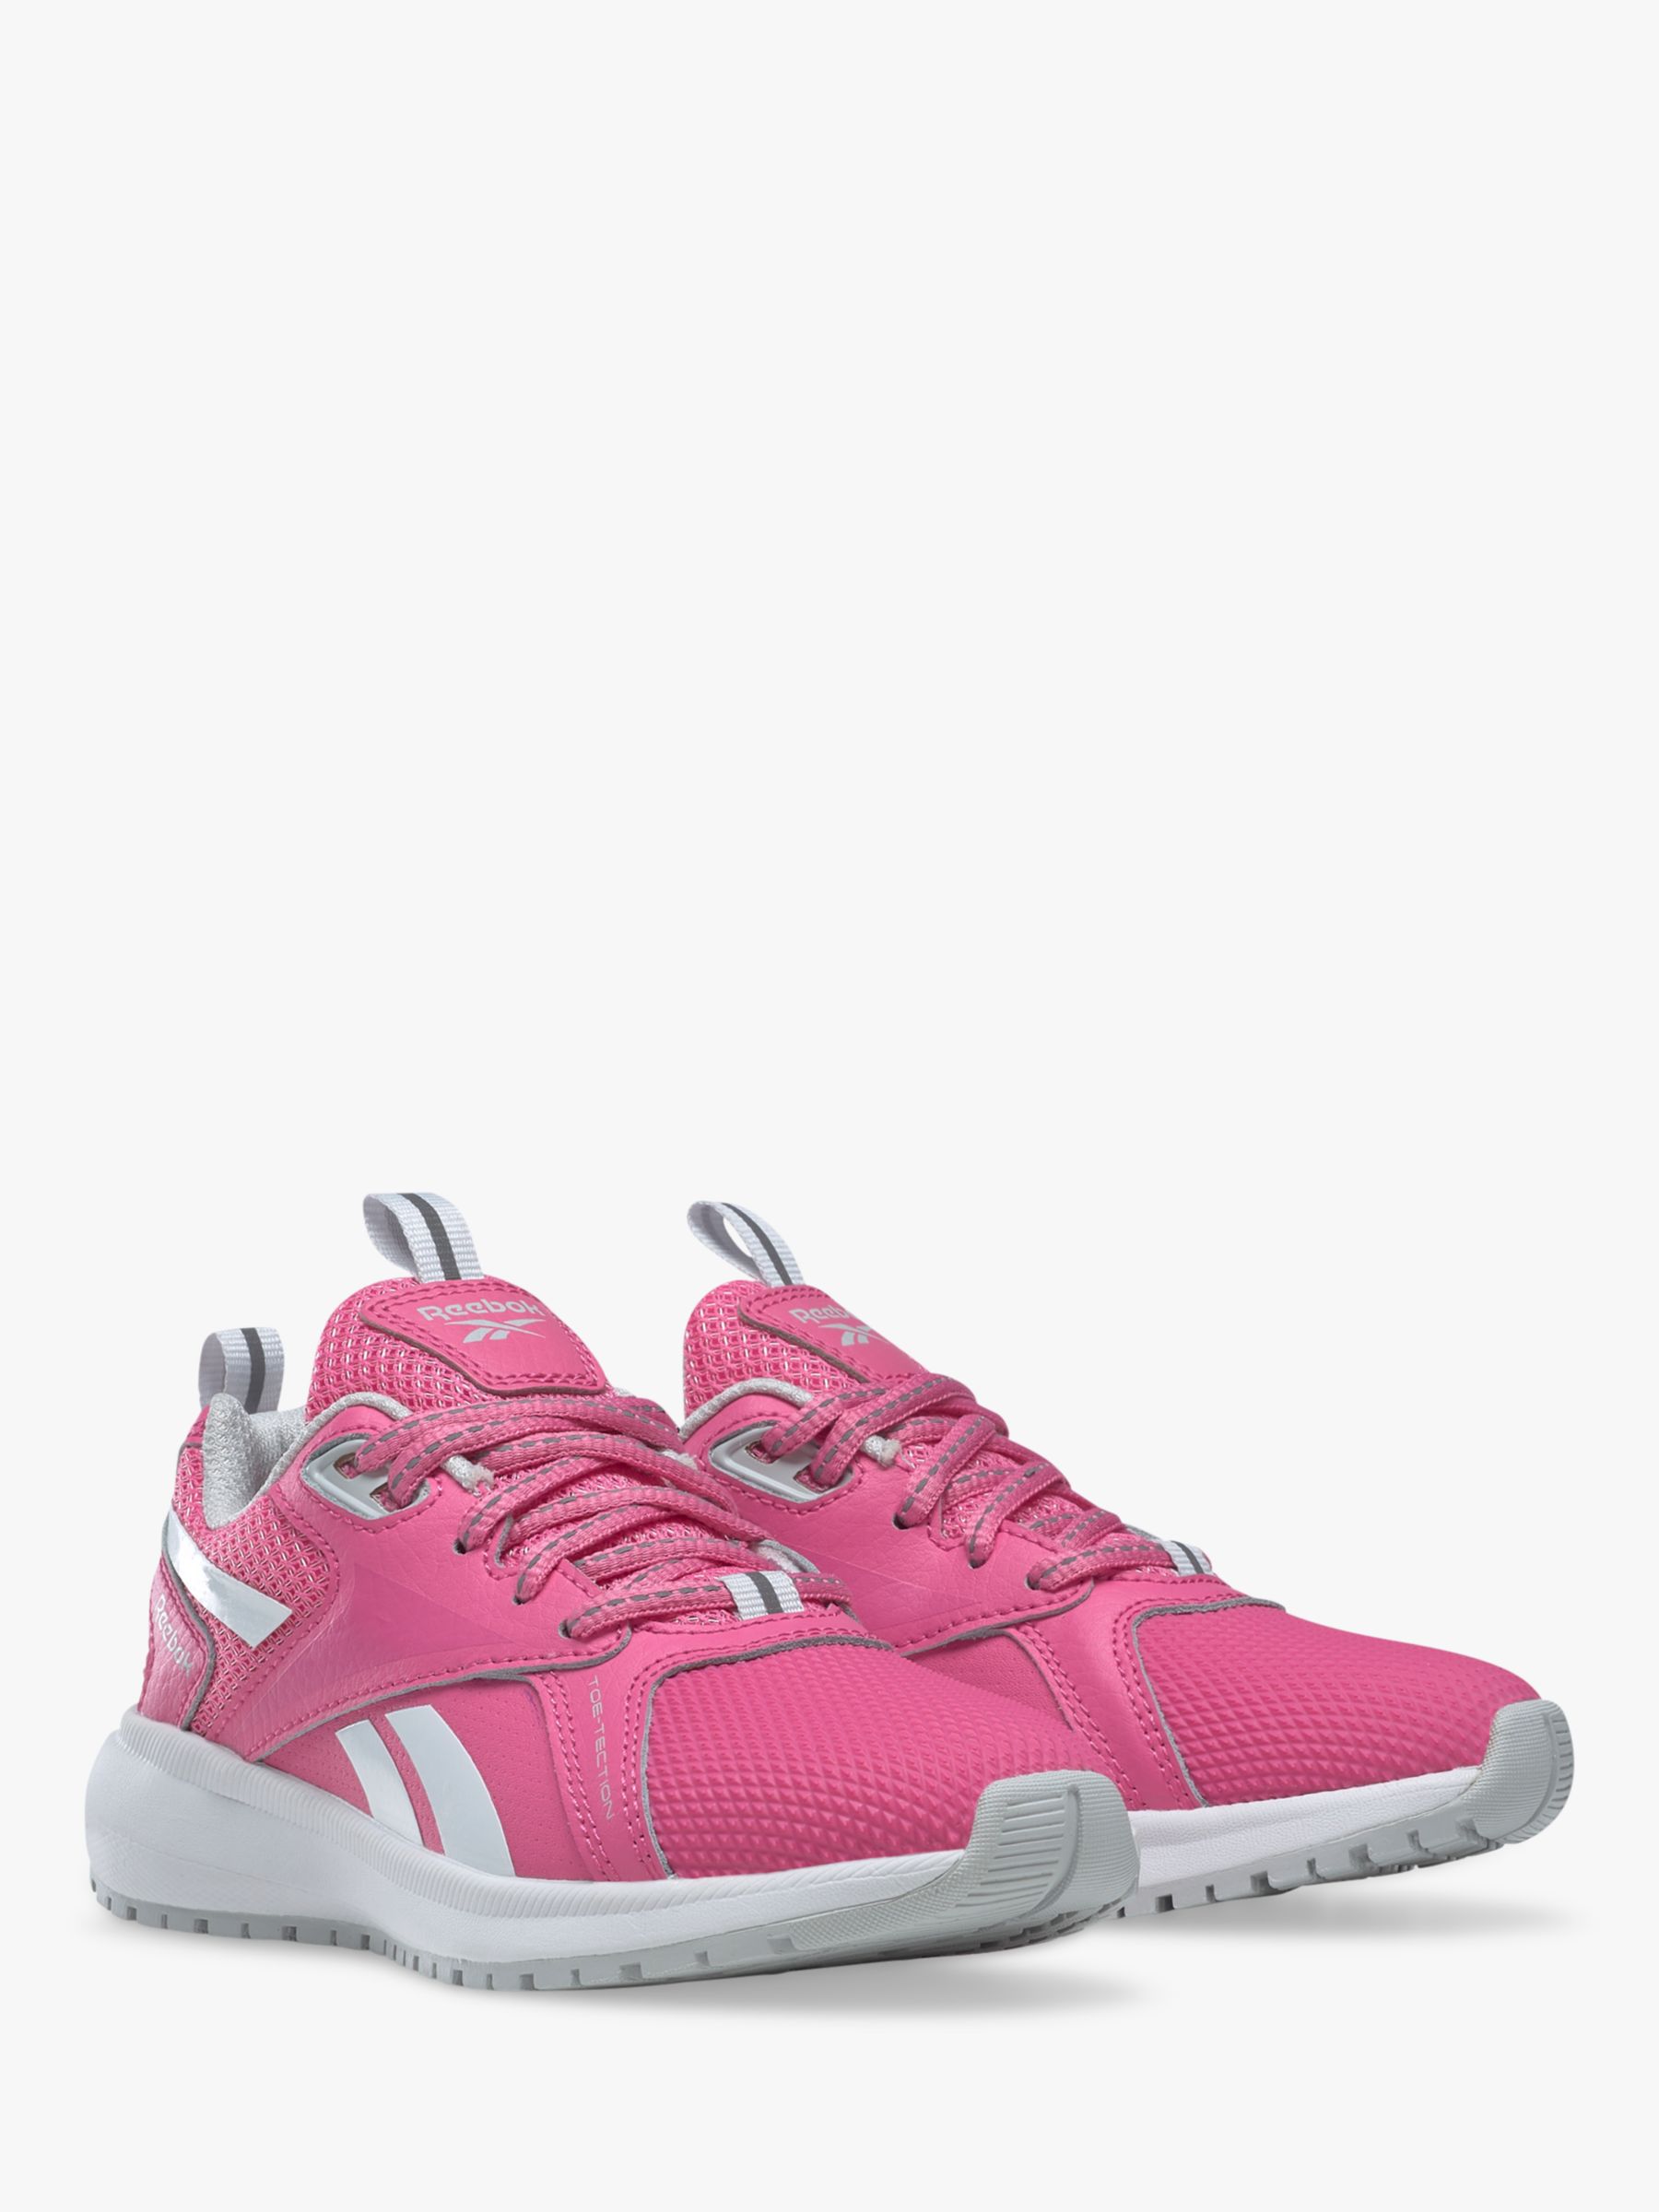 John Durable White Partners 2/Ftwr Reebok Trainers, & Kids\' XT True Lewis Grey at Pink/Pure